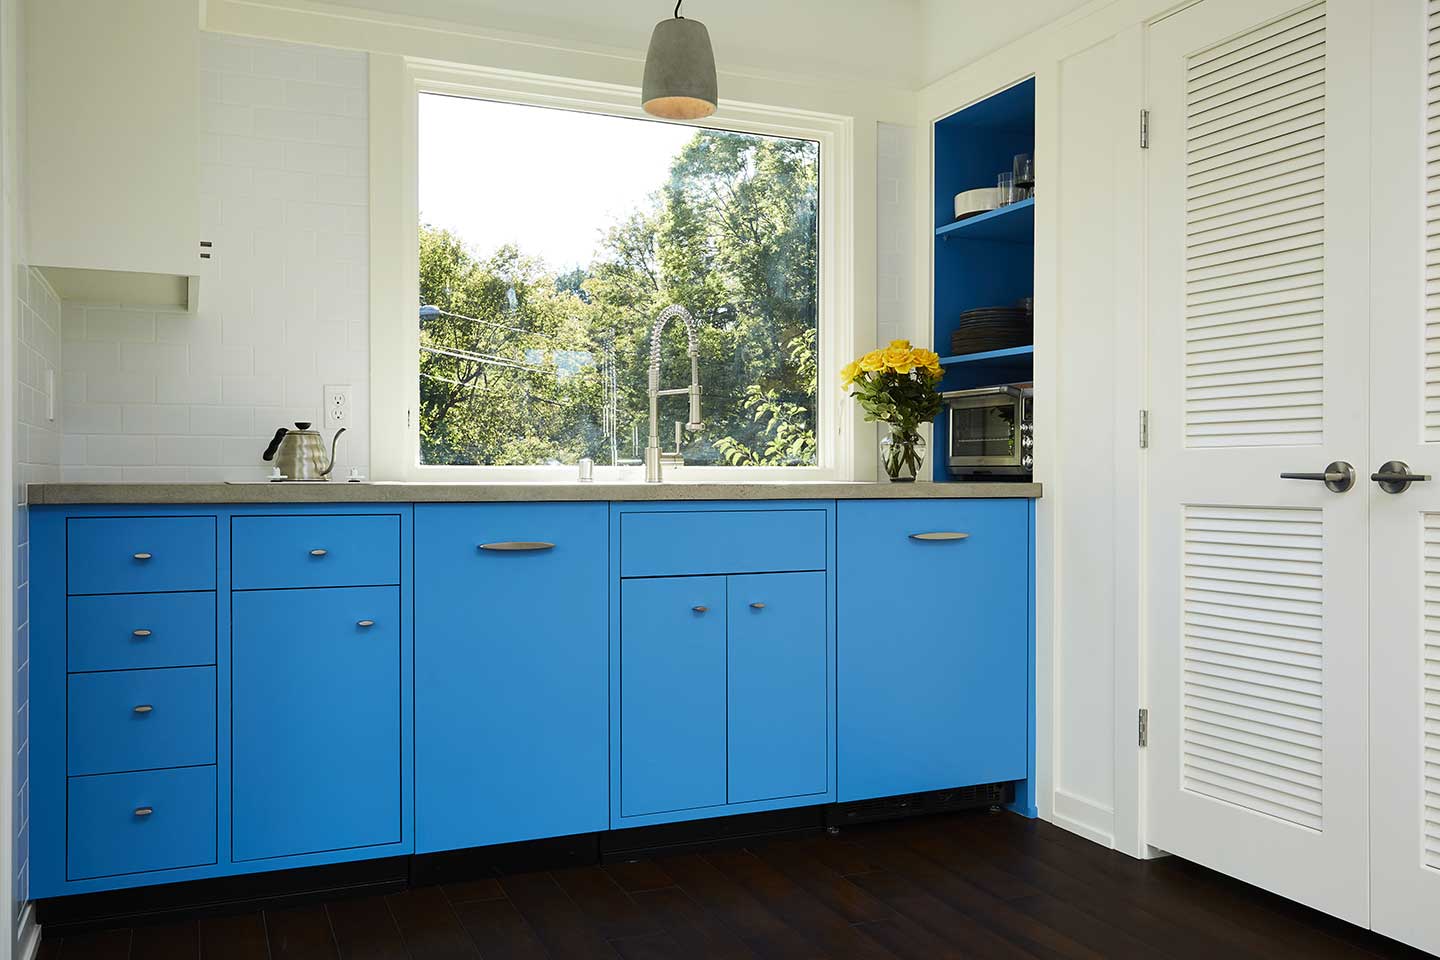 The kitchen inside a contemporary tiny house, with bright blue cabinets below the countertop and a Marvin Ultimate Awning window over the sink.